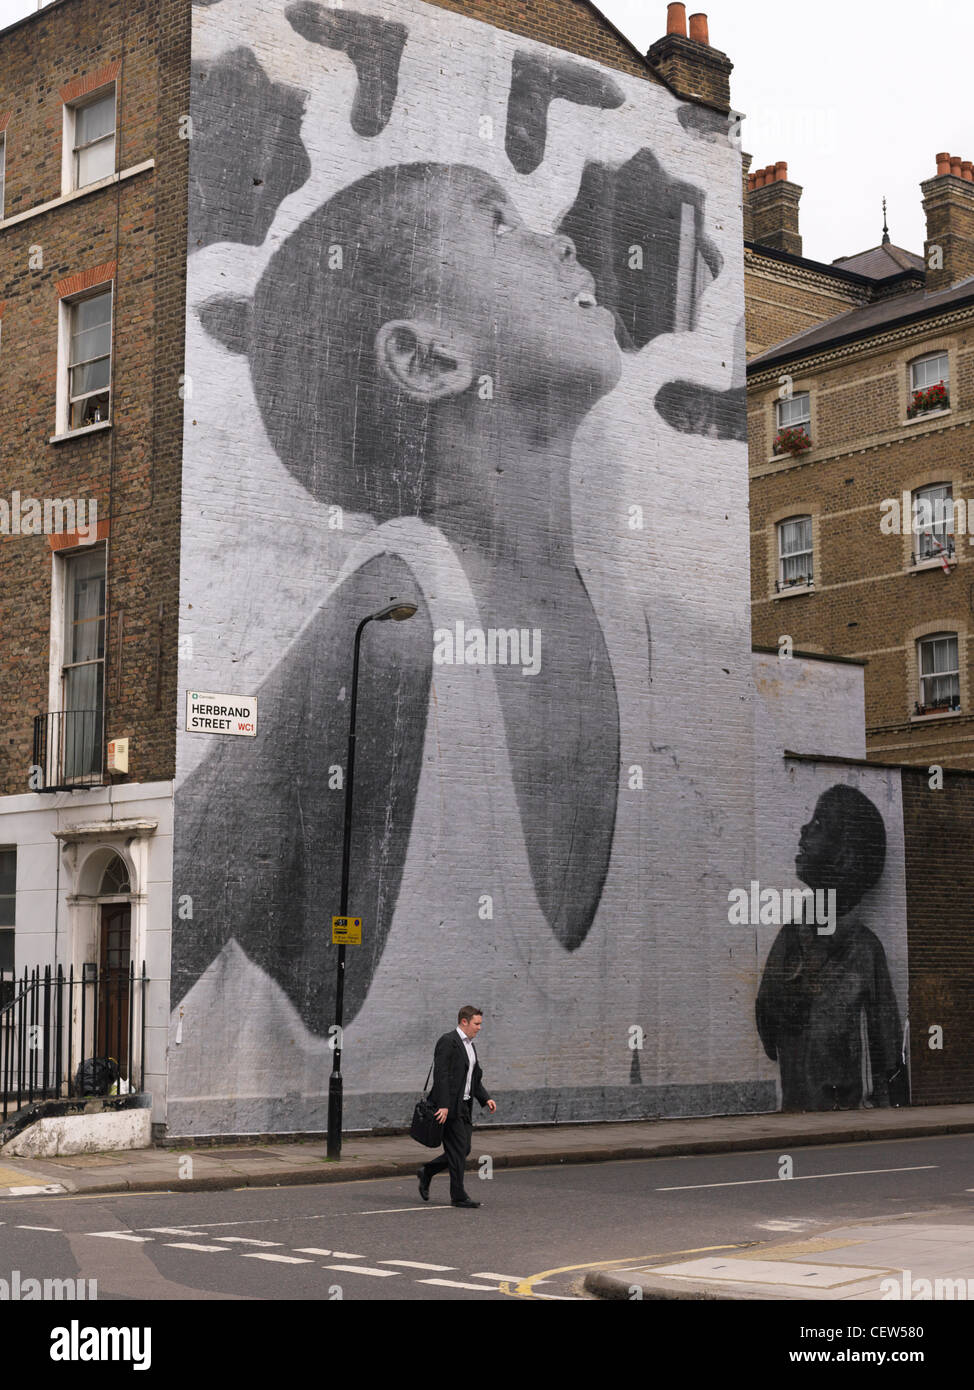 mural covering the wall of a four story building in london Stock Photo